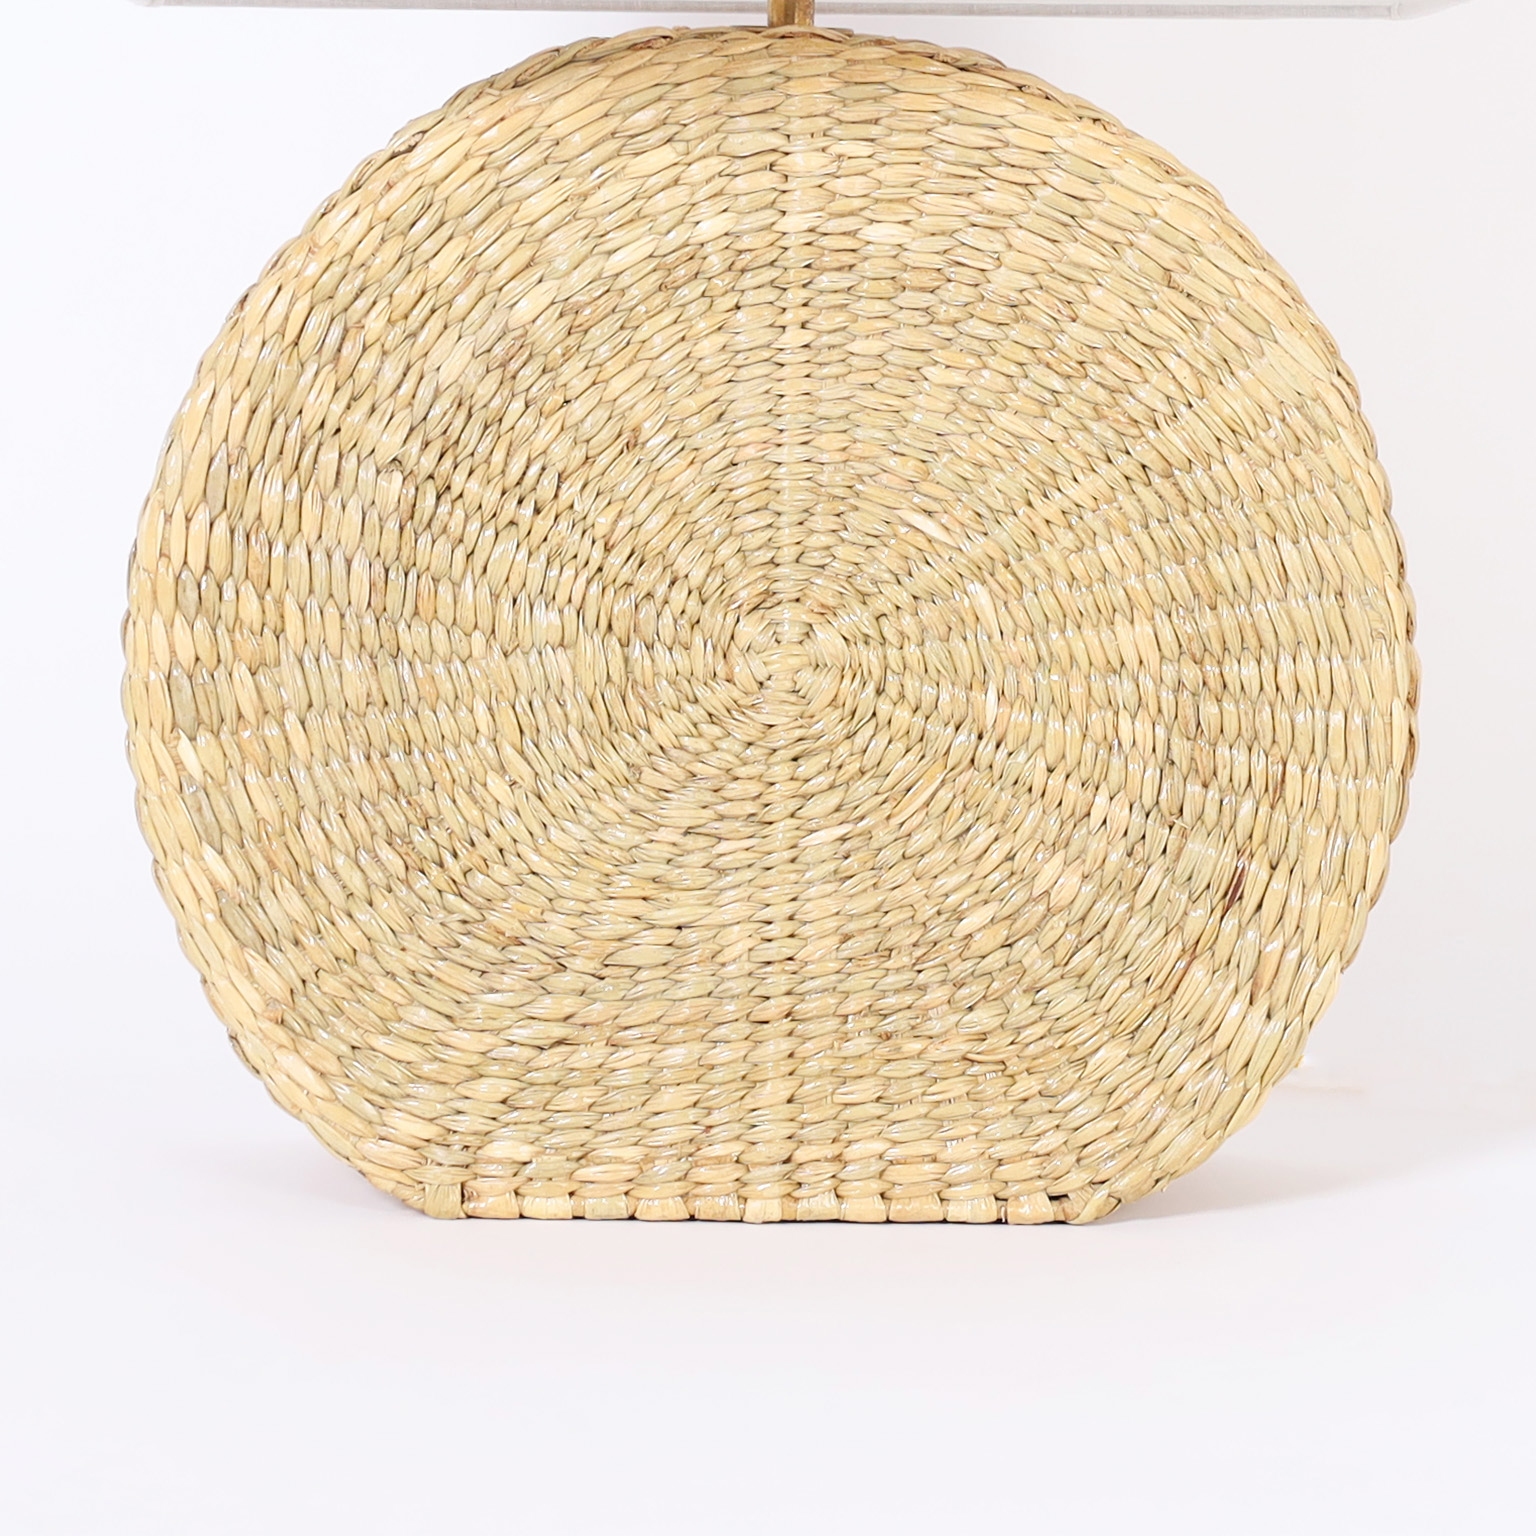 Pair of Spherical Wicker Table Lamps from the FS Flores Collection